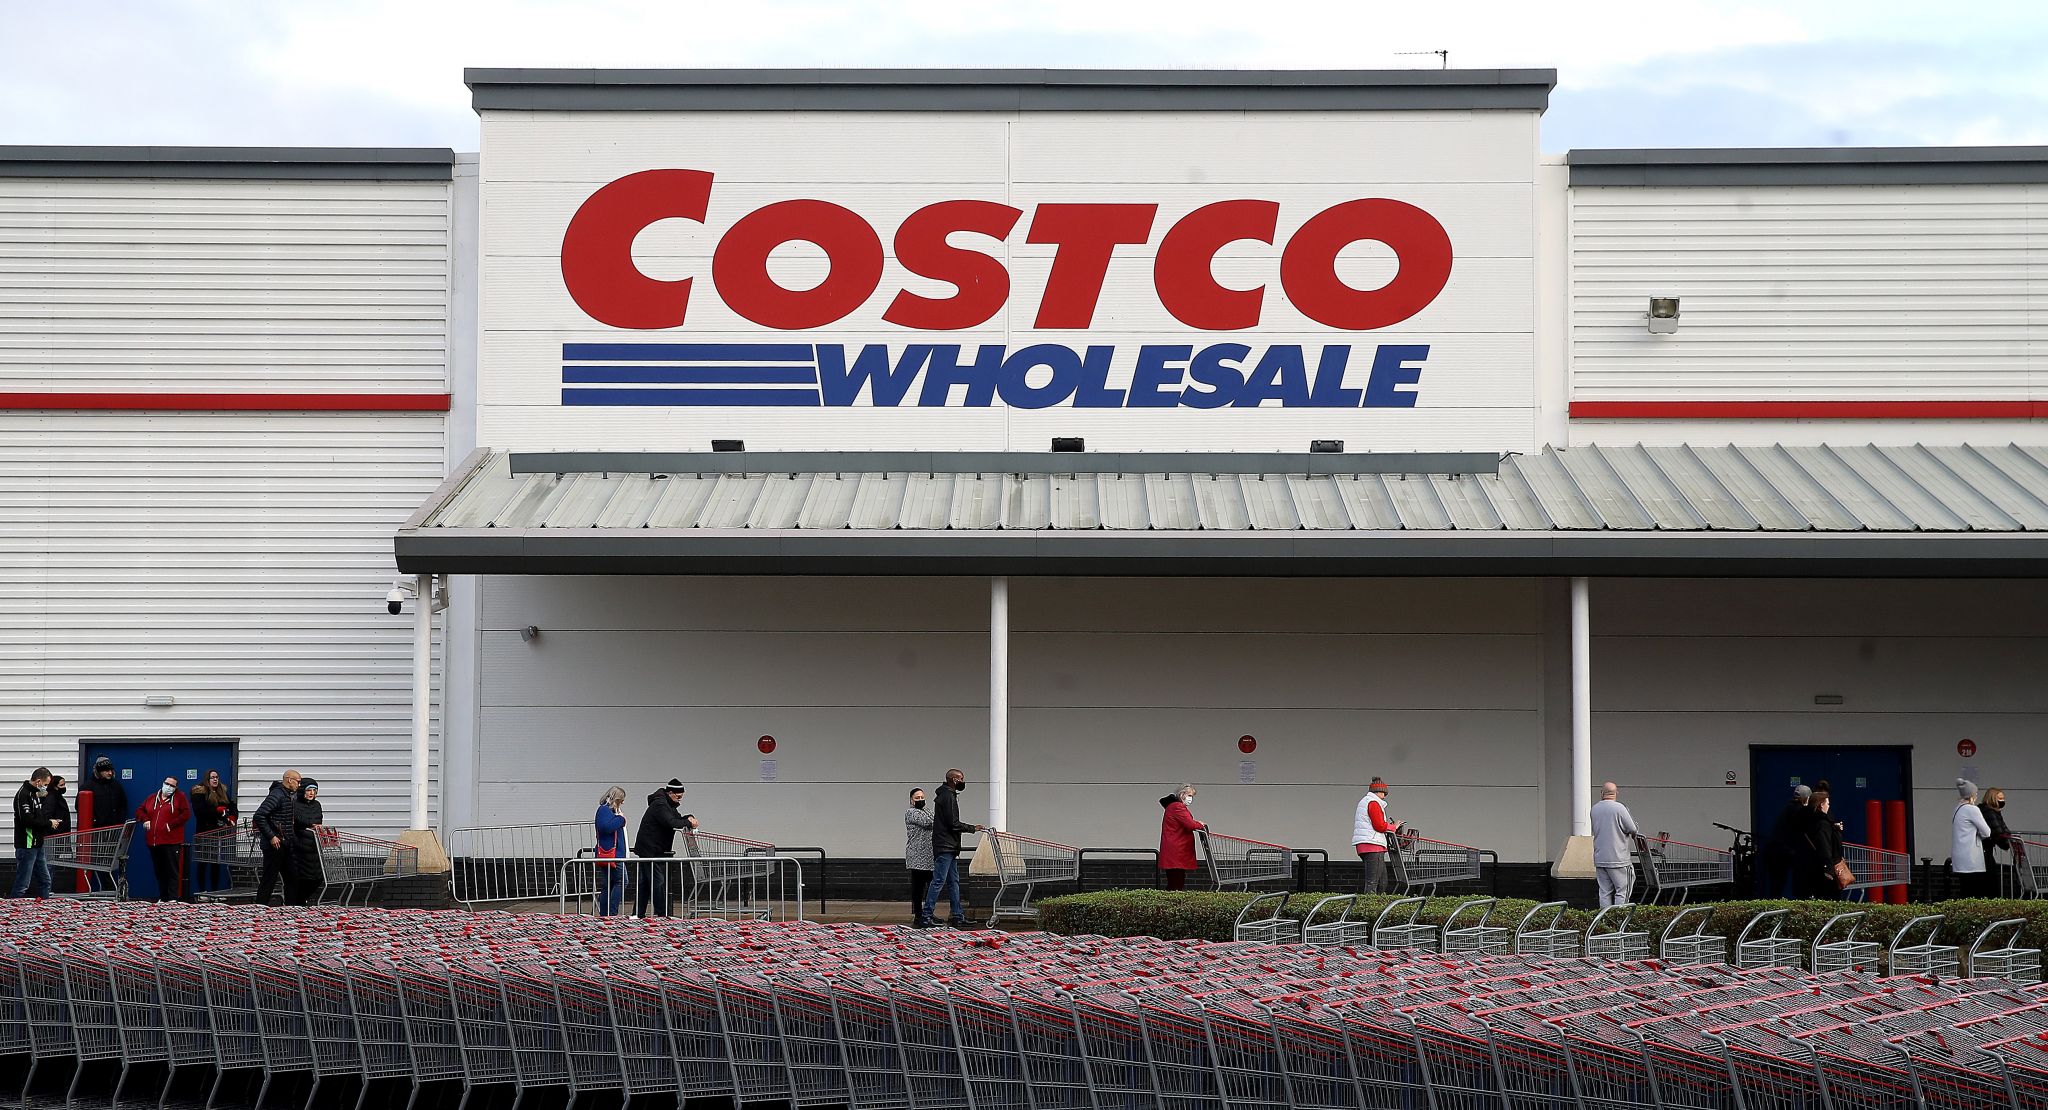 Both Costco and Sam's Club offer a similar shopping experience in big ...